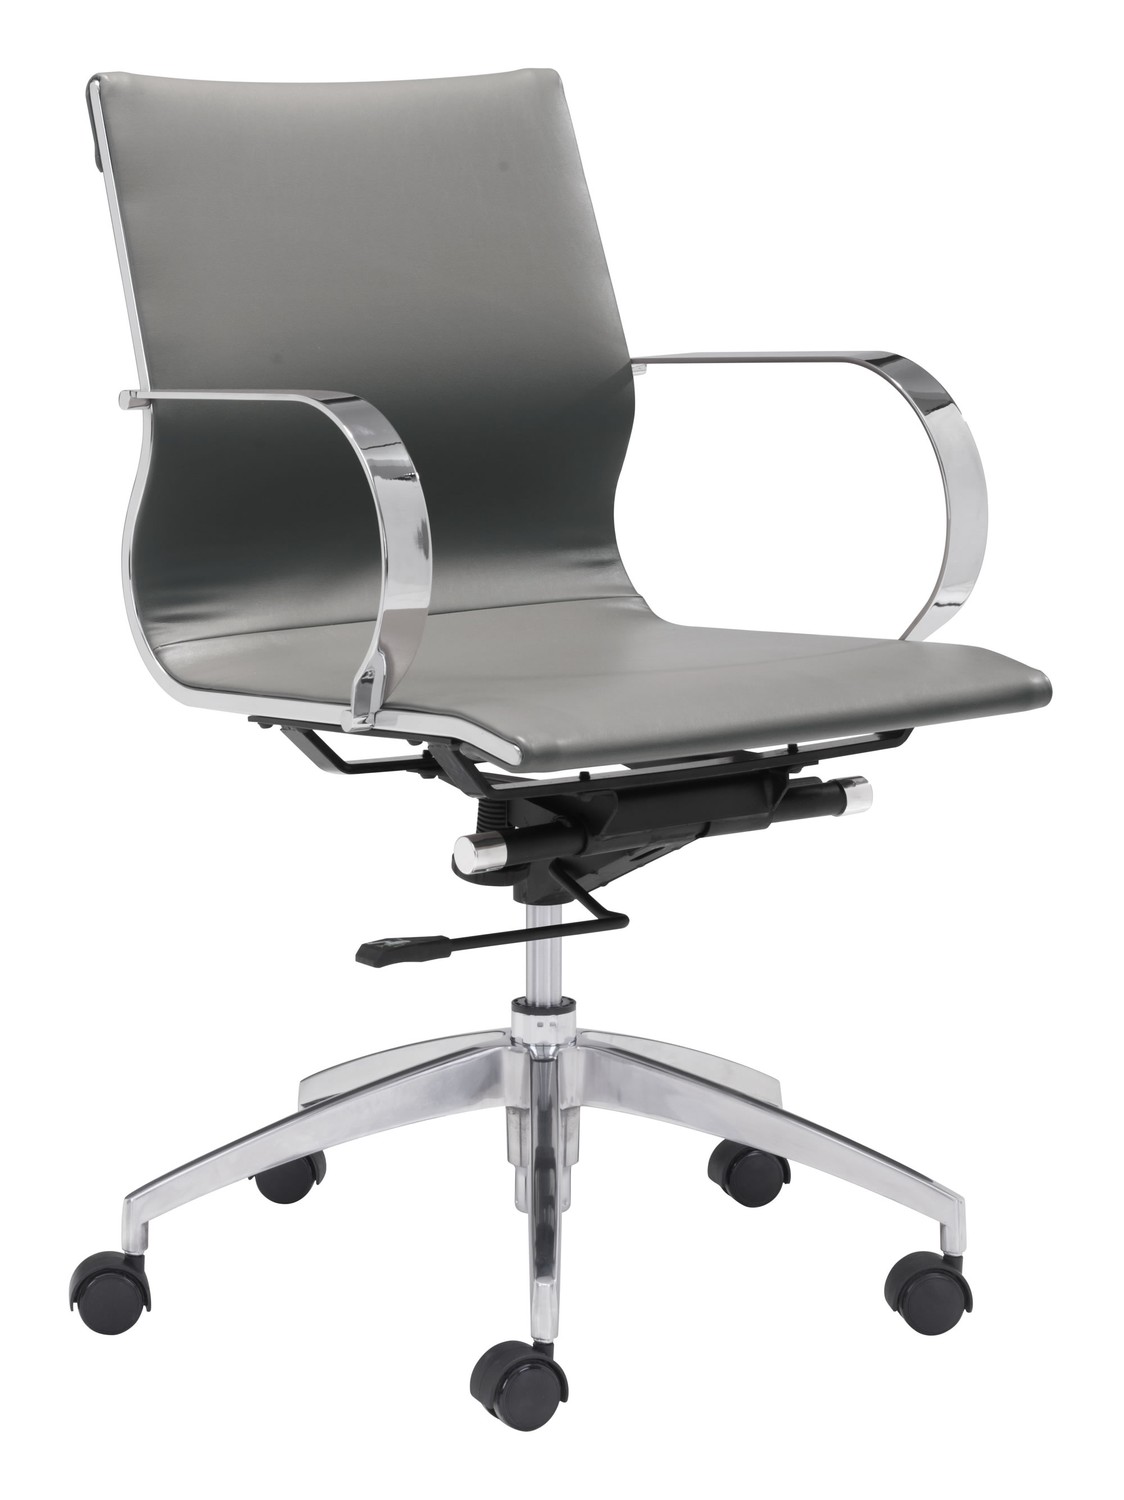 27.6" x 27.6" x 33.9" Gray, Leatherette, Chromed Steel, Low Back Office Chair